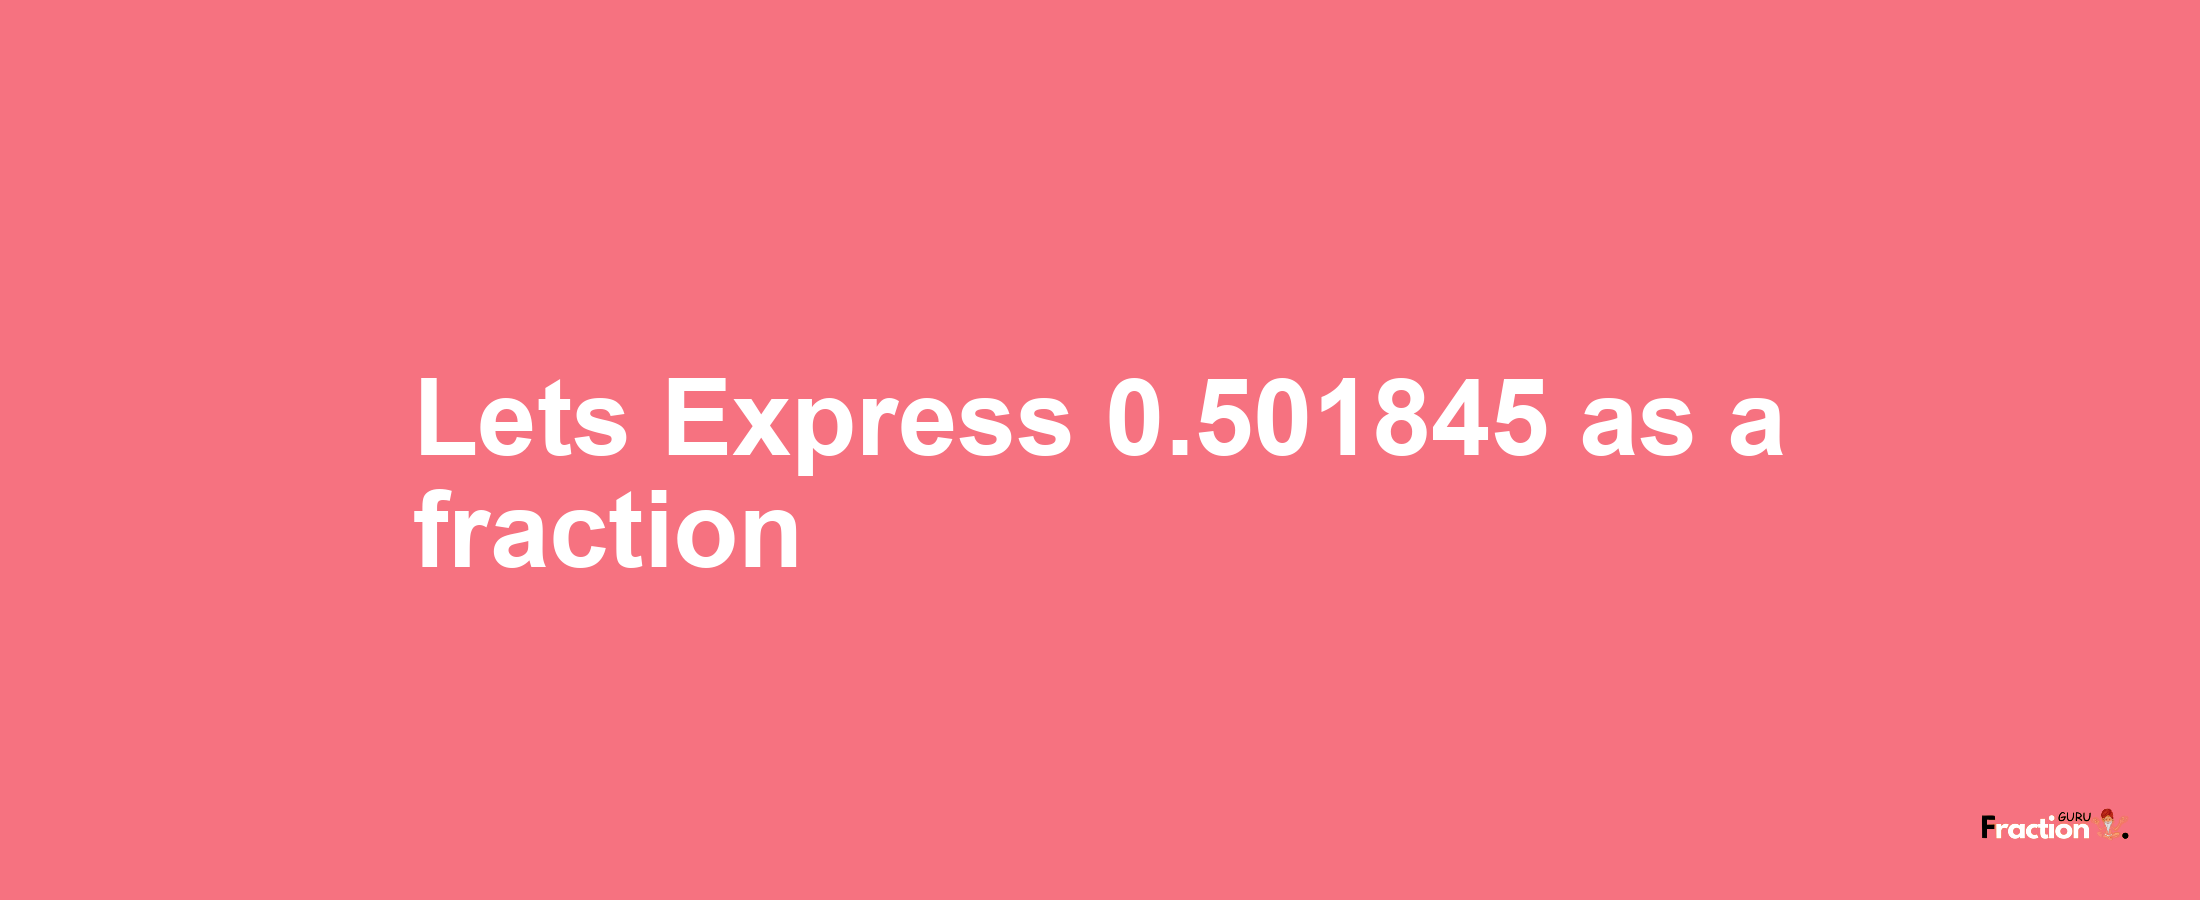 Lets Express 0.501845 as afraction